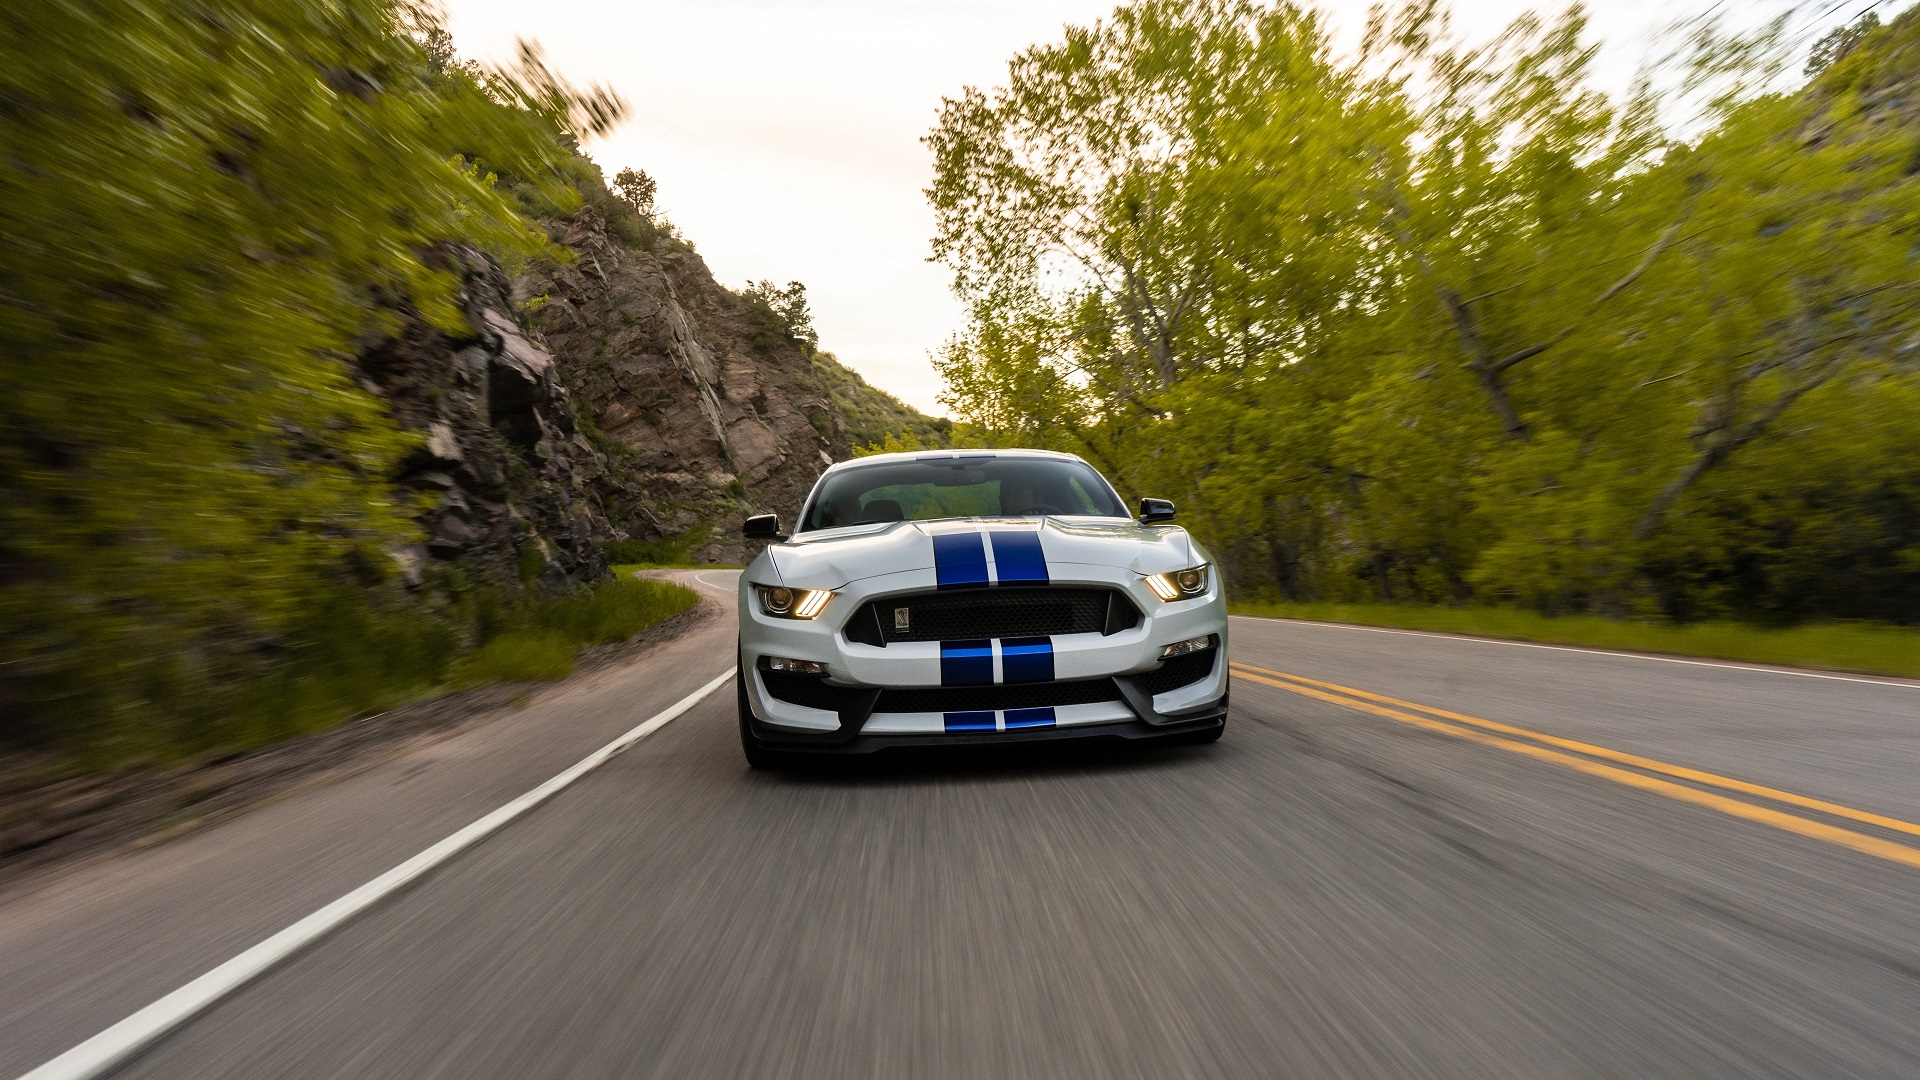 General 1920x1080 car Ford Ford Mustang road trees motion blur stripes striped Ford Mustang Shelby Ford Mustang S550 frontal view muscle cars American cars